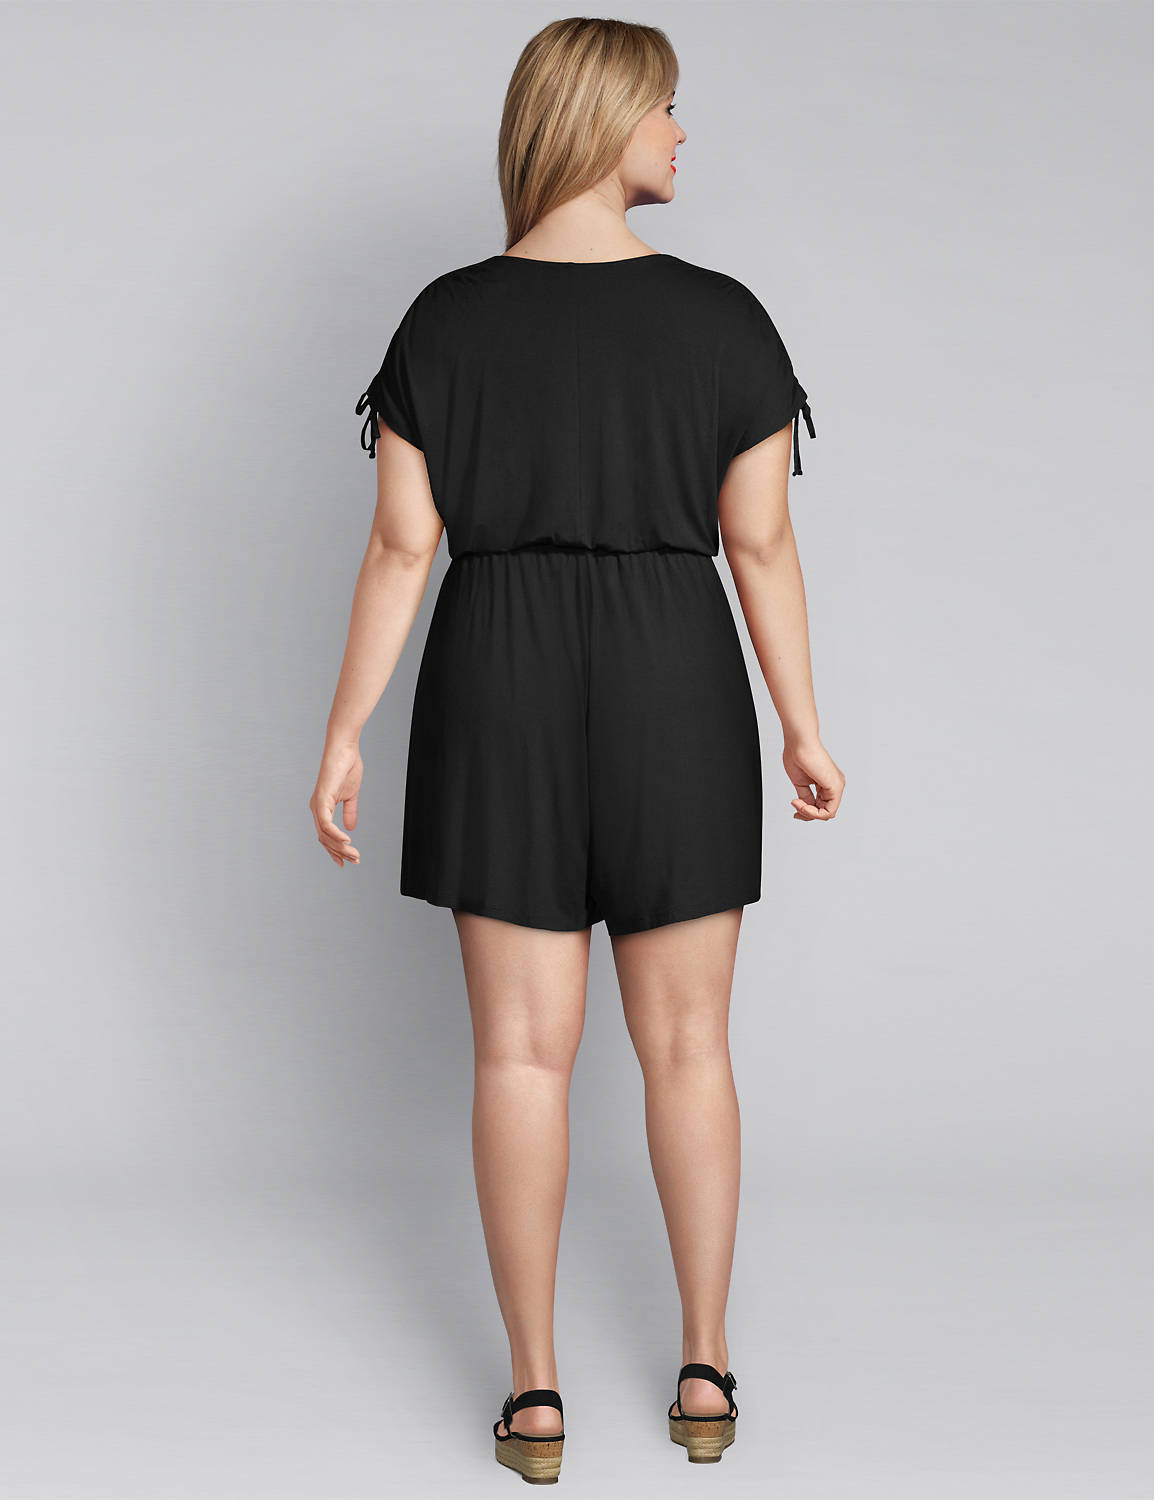 1113469 SH RUCHED SH ROMPER - 49.95:Pitch Black LB 1000322:14/16 Product Image 2